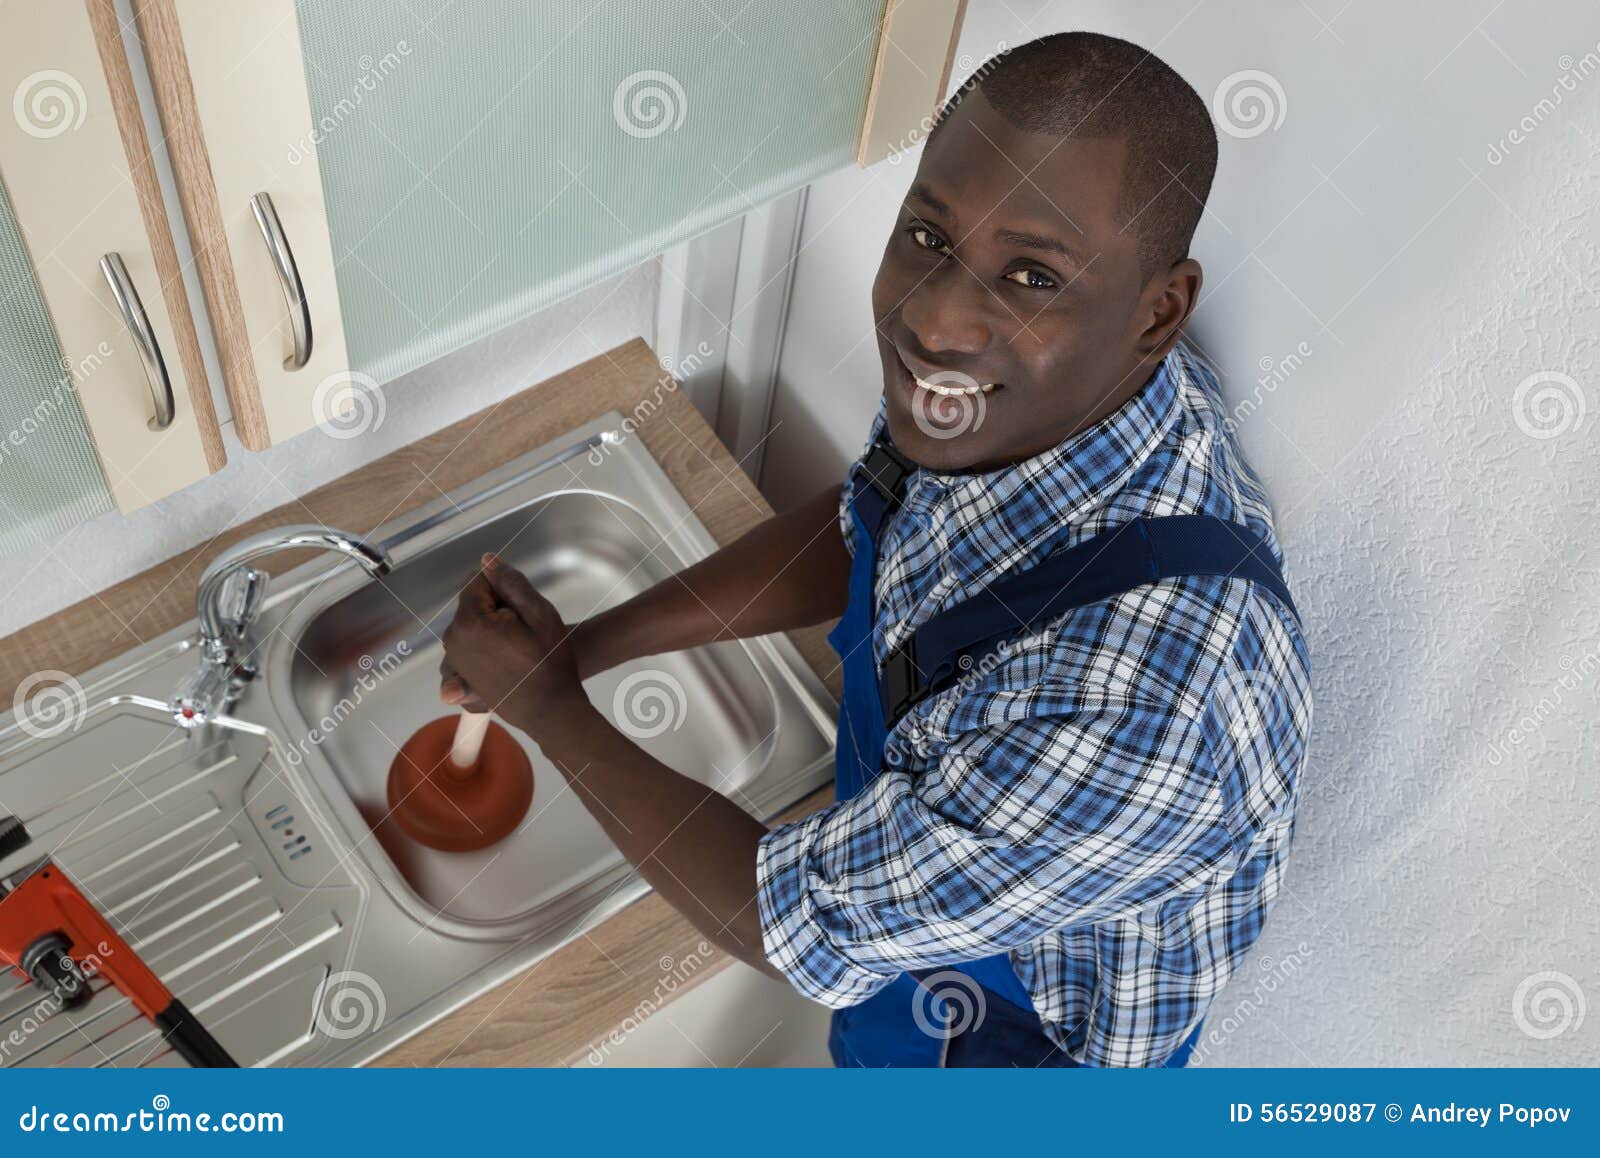 https://thumbs.dreamstime.com/z/plumber-using-plunger-kitchen-sink-young-happy-african-to-unclog-56529087.jpg